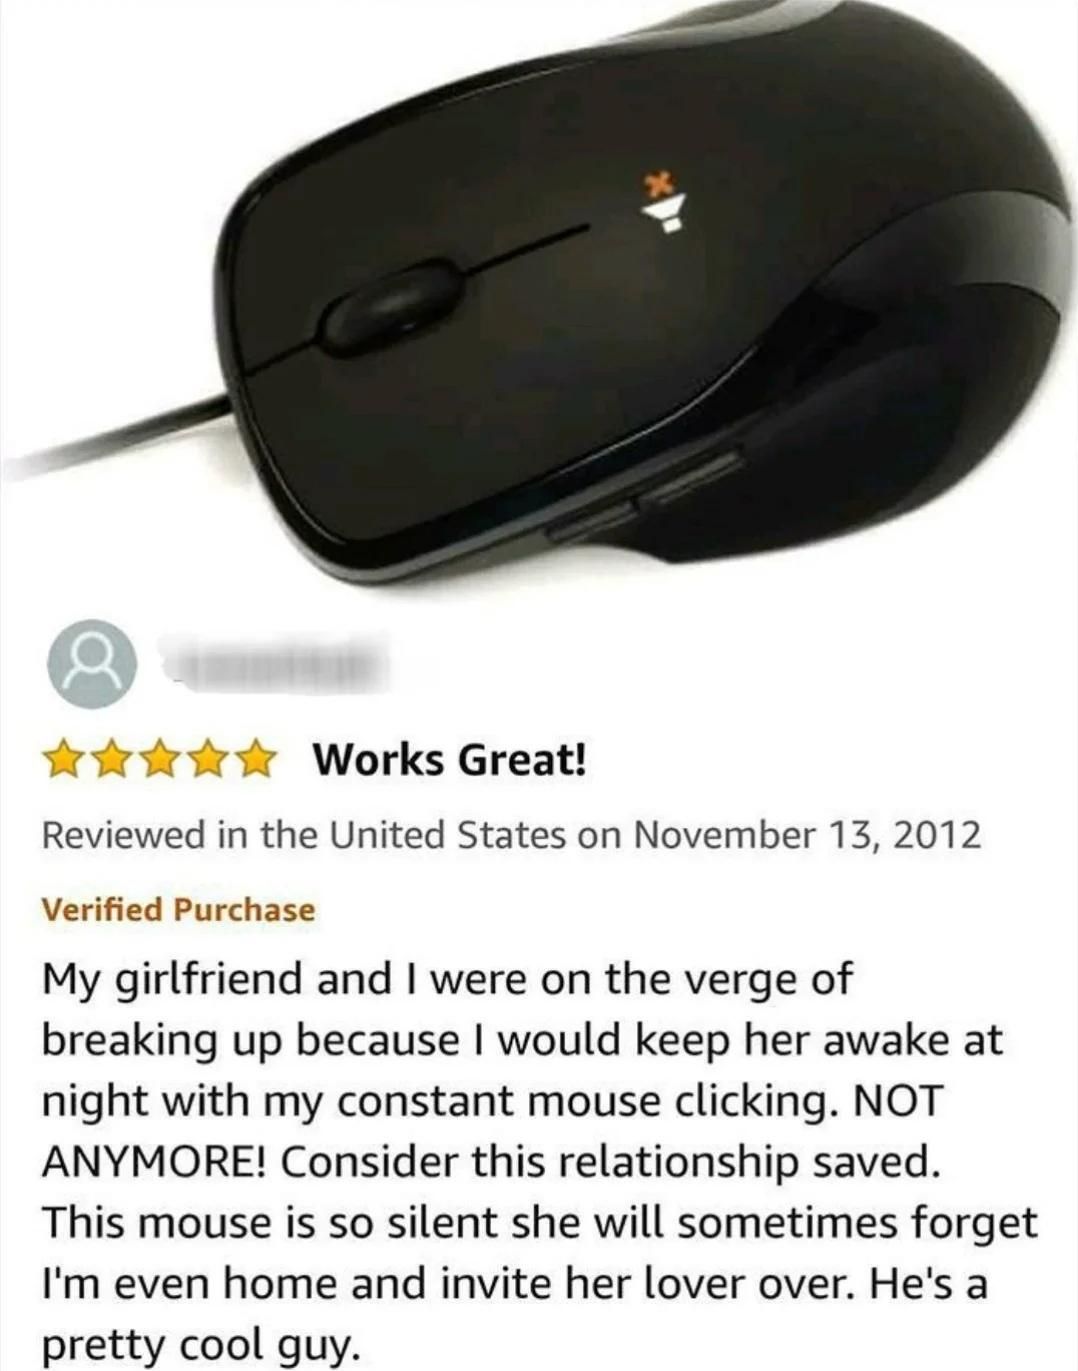 What a nice review.